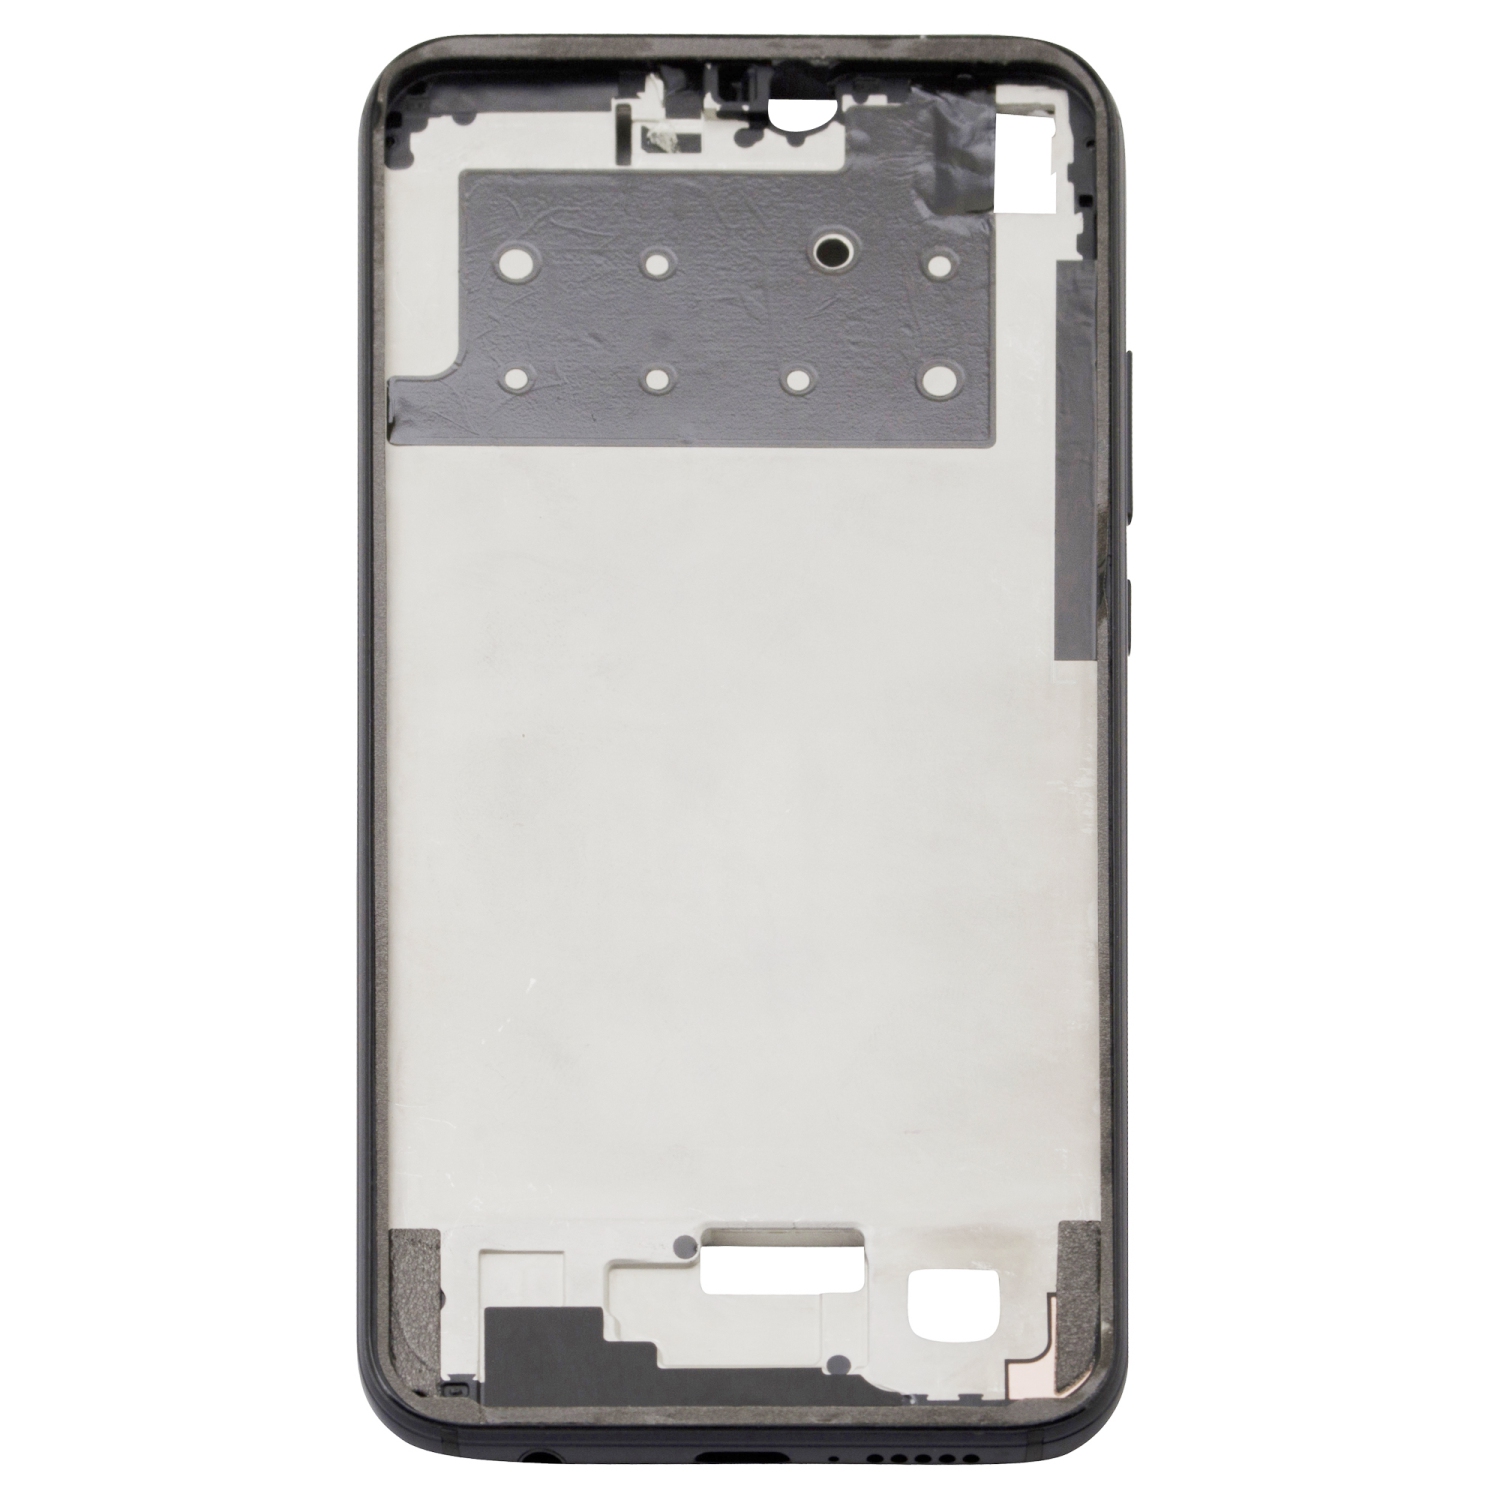 Huawei P20 Lite Front Housing Frame With Adhesive Replacement - Black